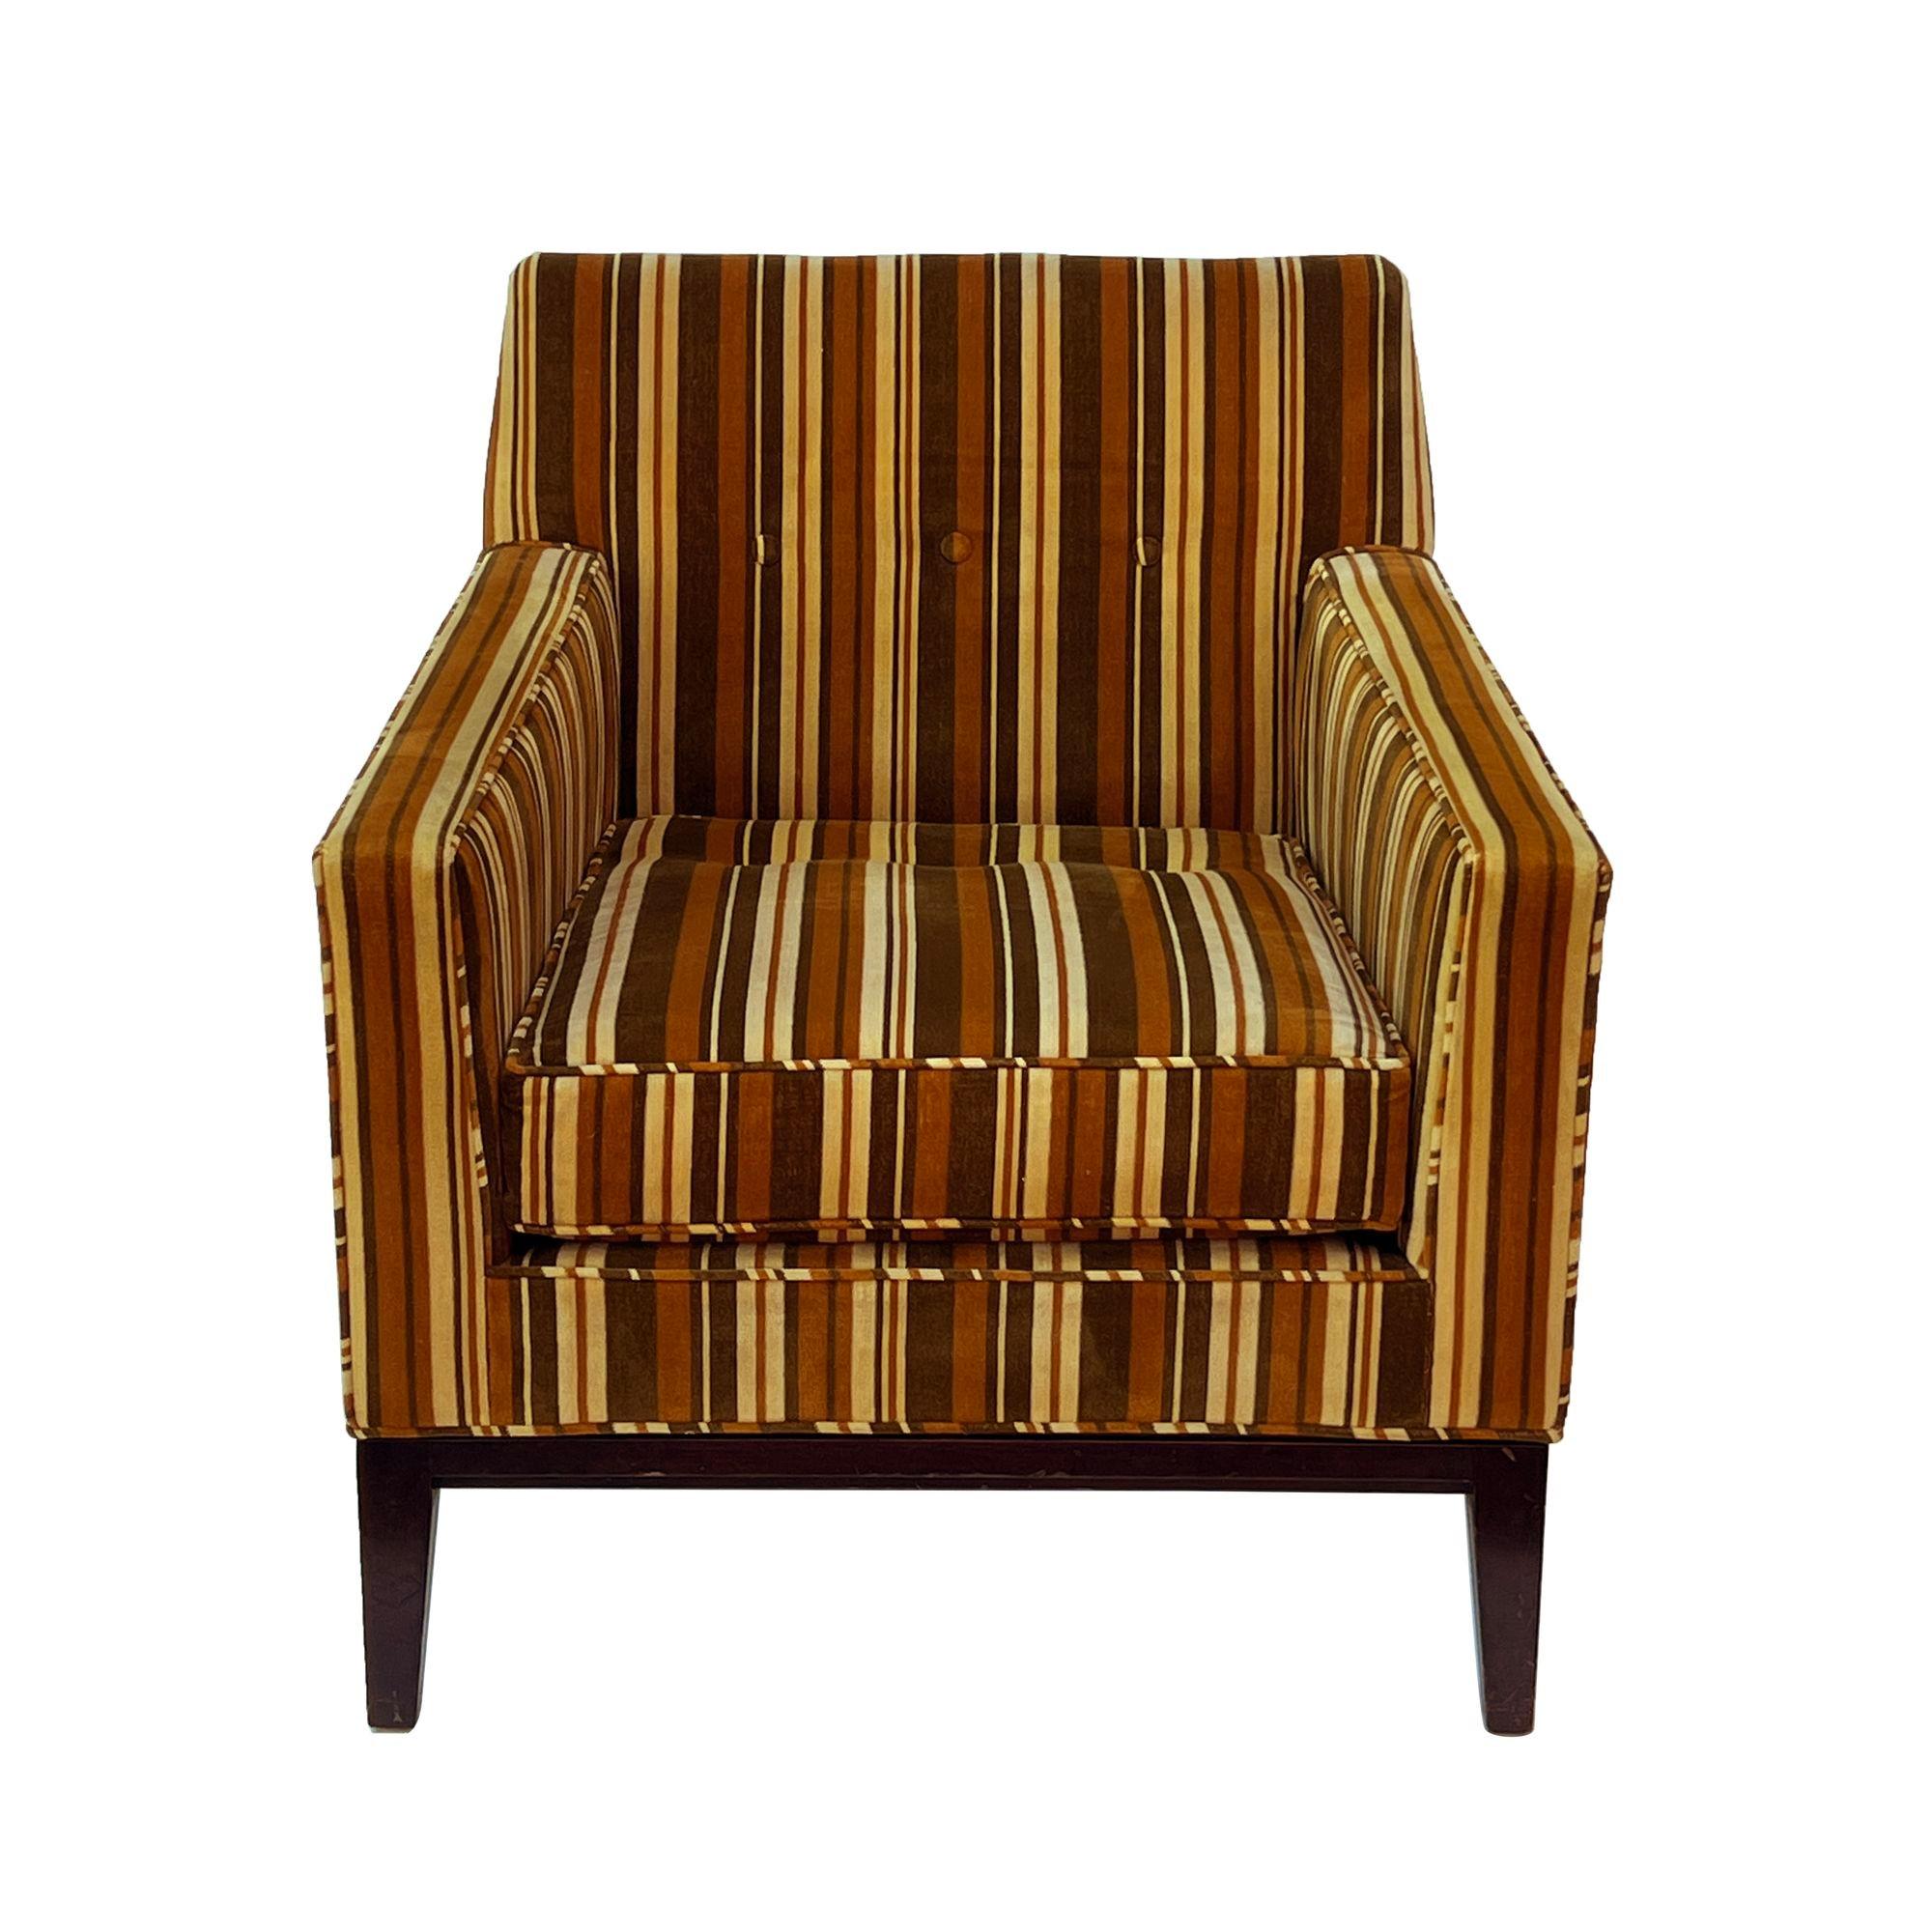 USA, 1960s
Gorgeous angular armchair by Edward Wormley for Dunbar in its original velvet striped upholstery. The details and proportion on this chair are just perfect. The frame angles down toward the back, there's a slight pitch forward at the arm,